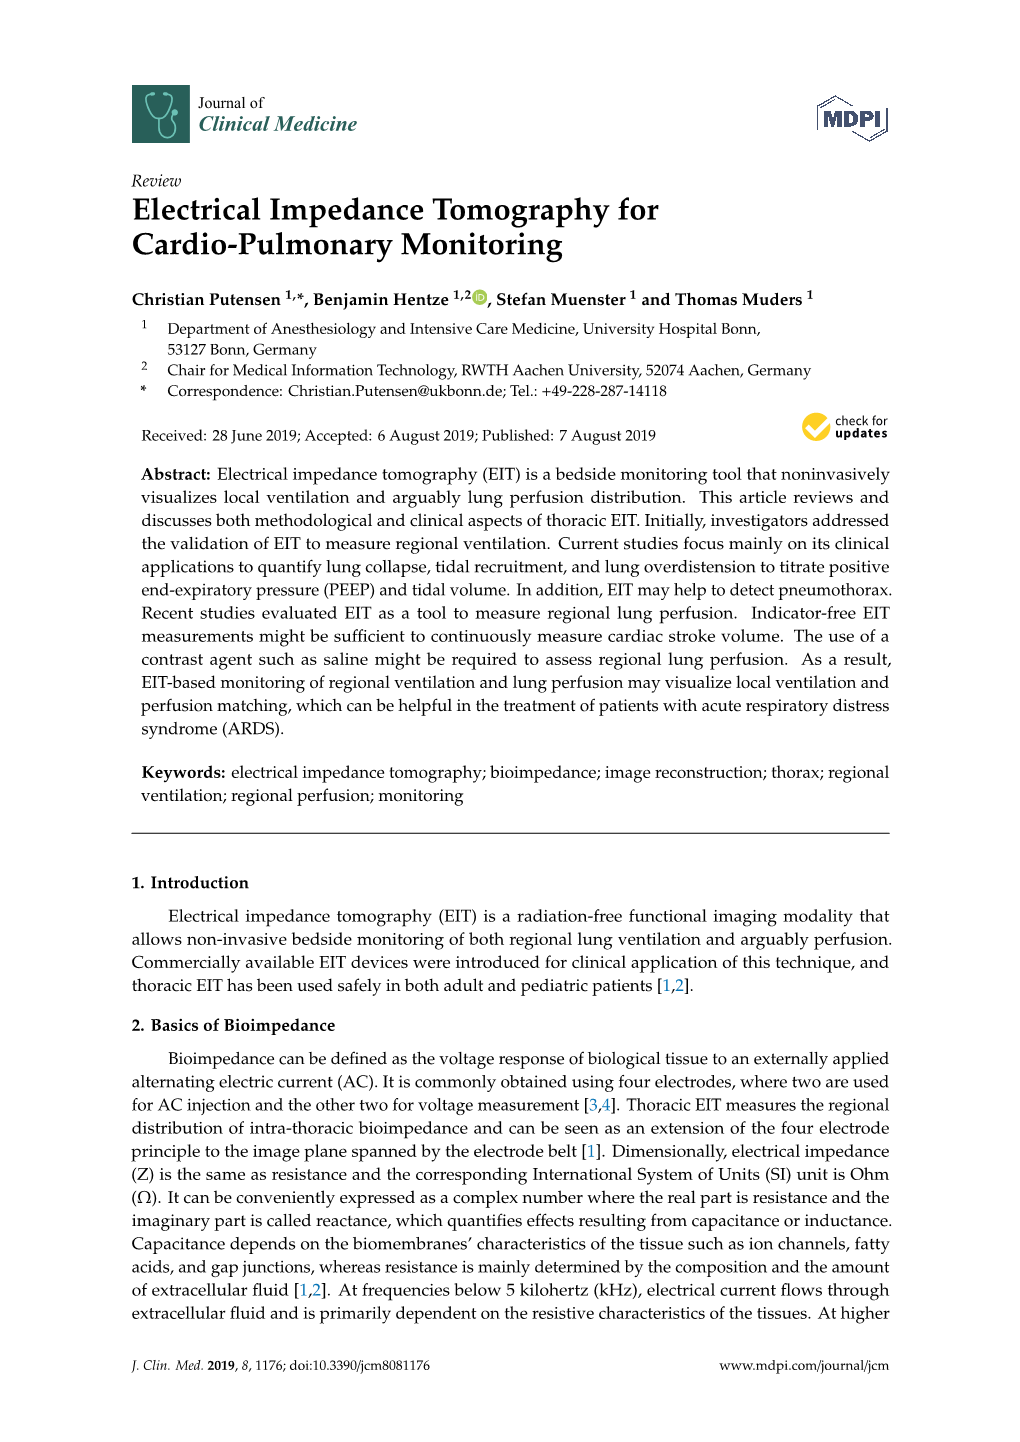 Electrical Impedance Tomography for Cardio-Pulmonary Monitoring